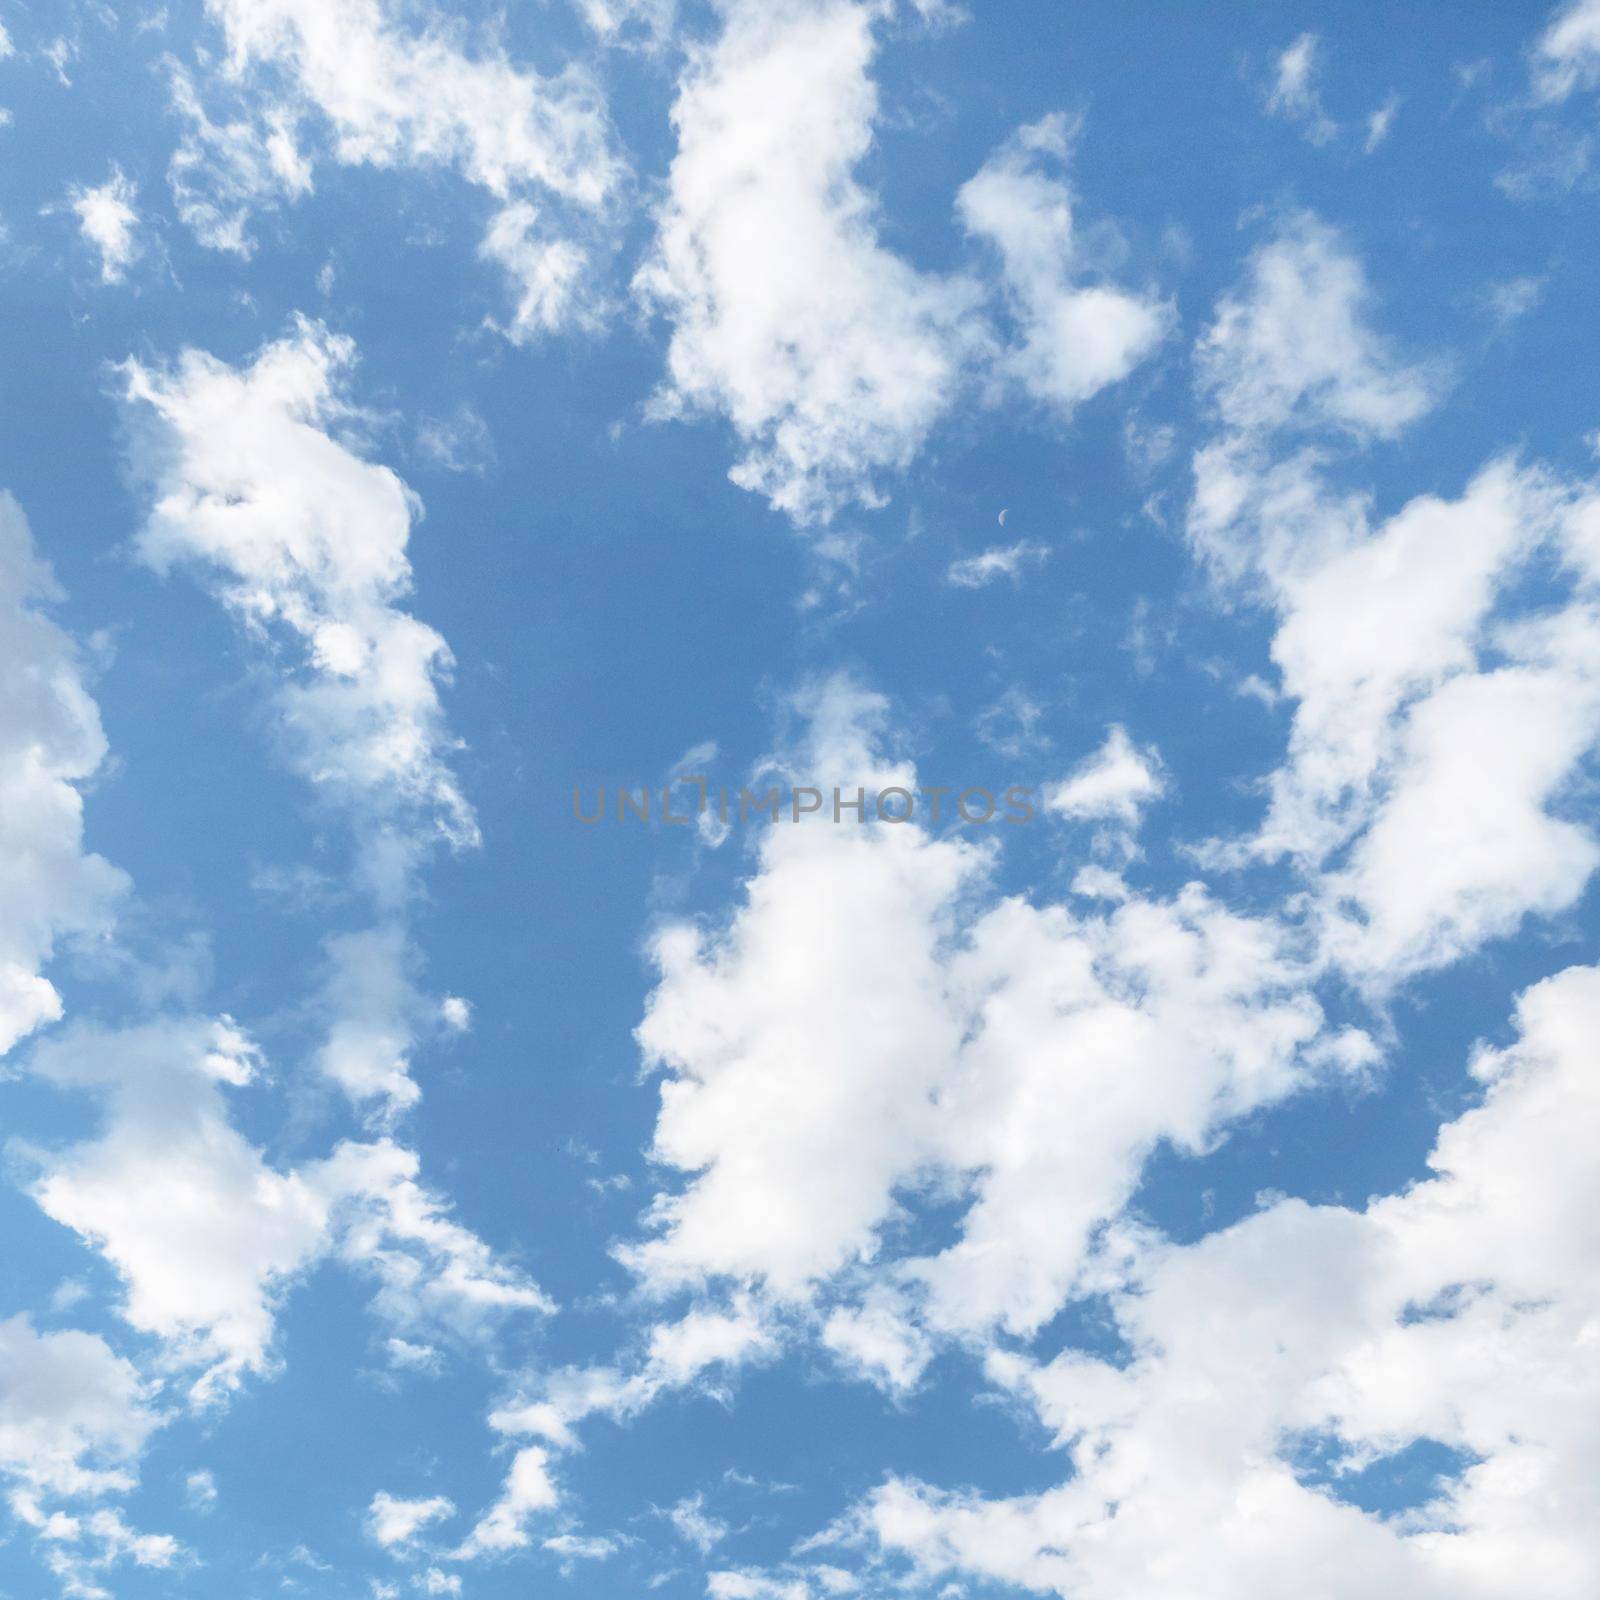 Sky abstract background. Clouds with blue sky. Ideal for textures and backgrounds.